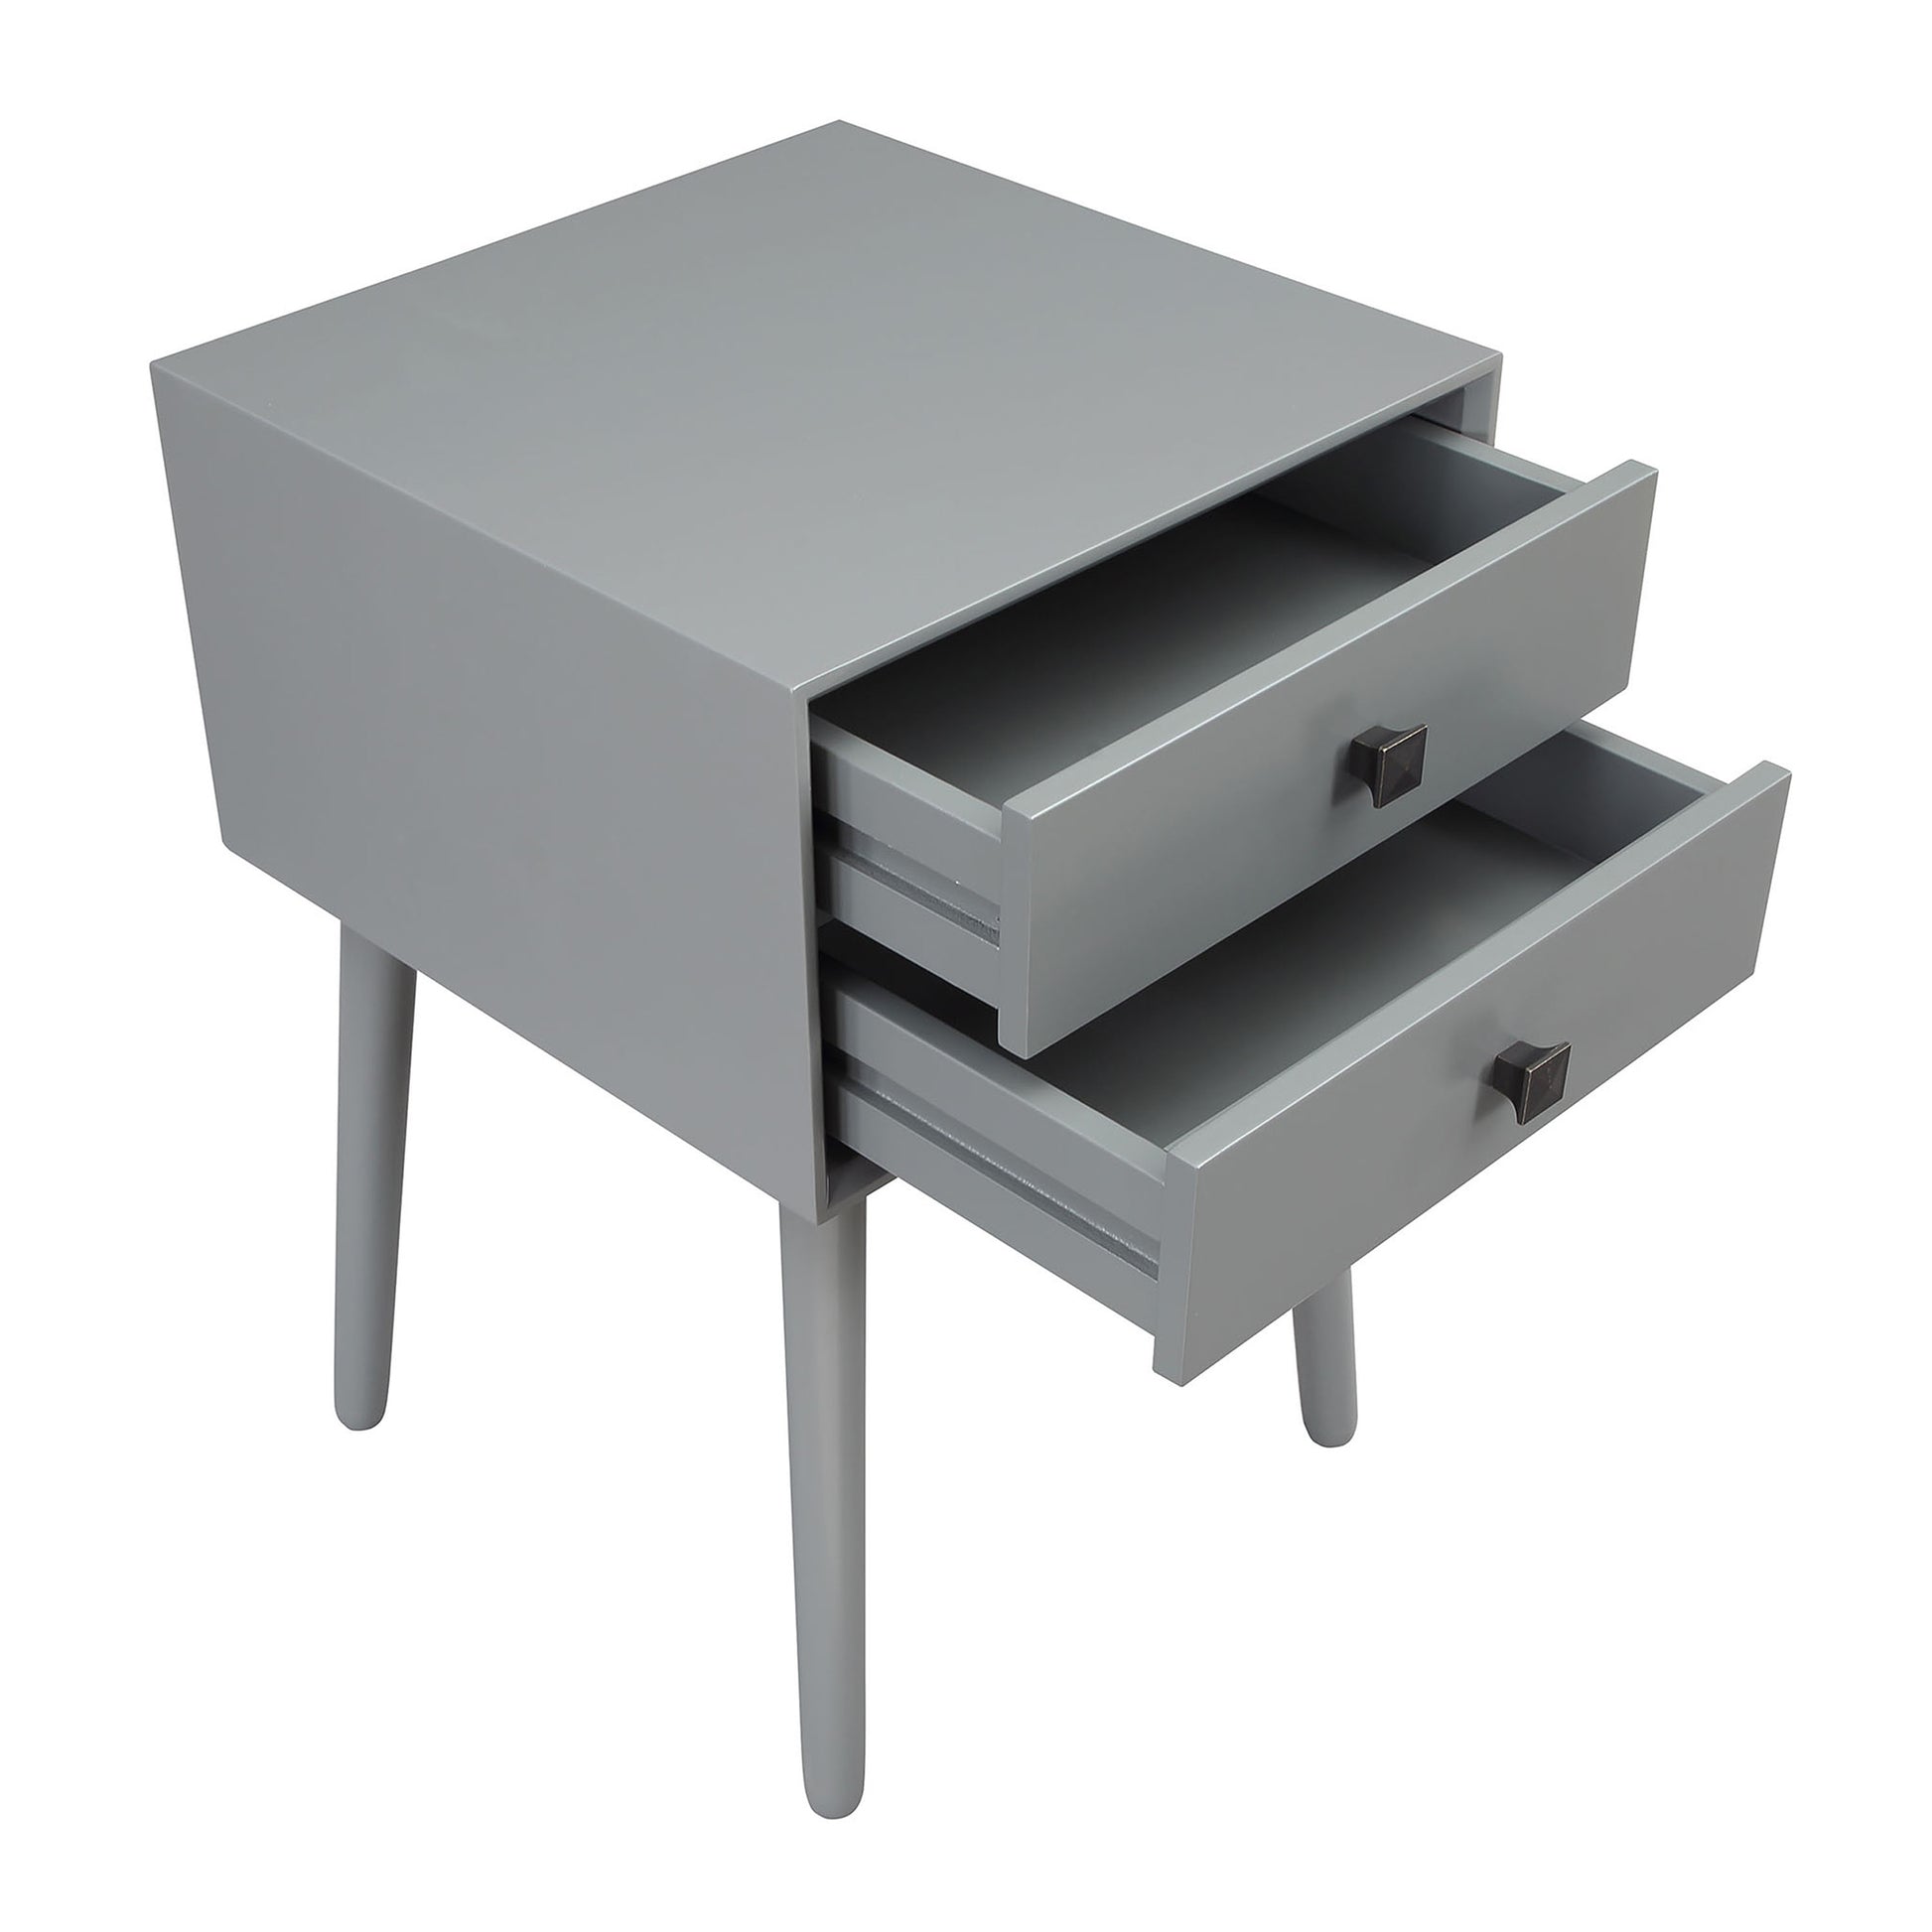 Right angled upper view of a modern gray two-drawer compact nightstand with splayed legs and drawers open on a white background